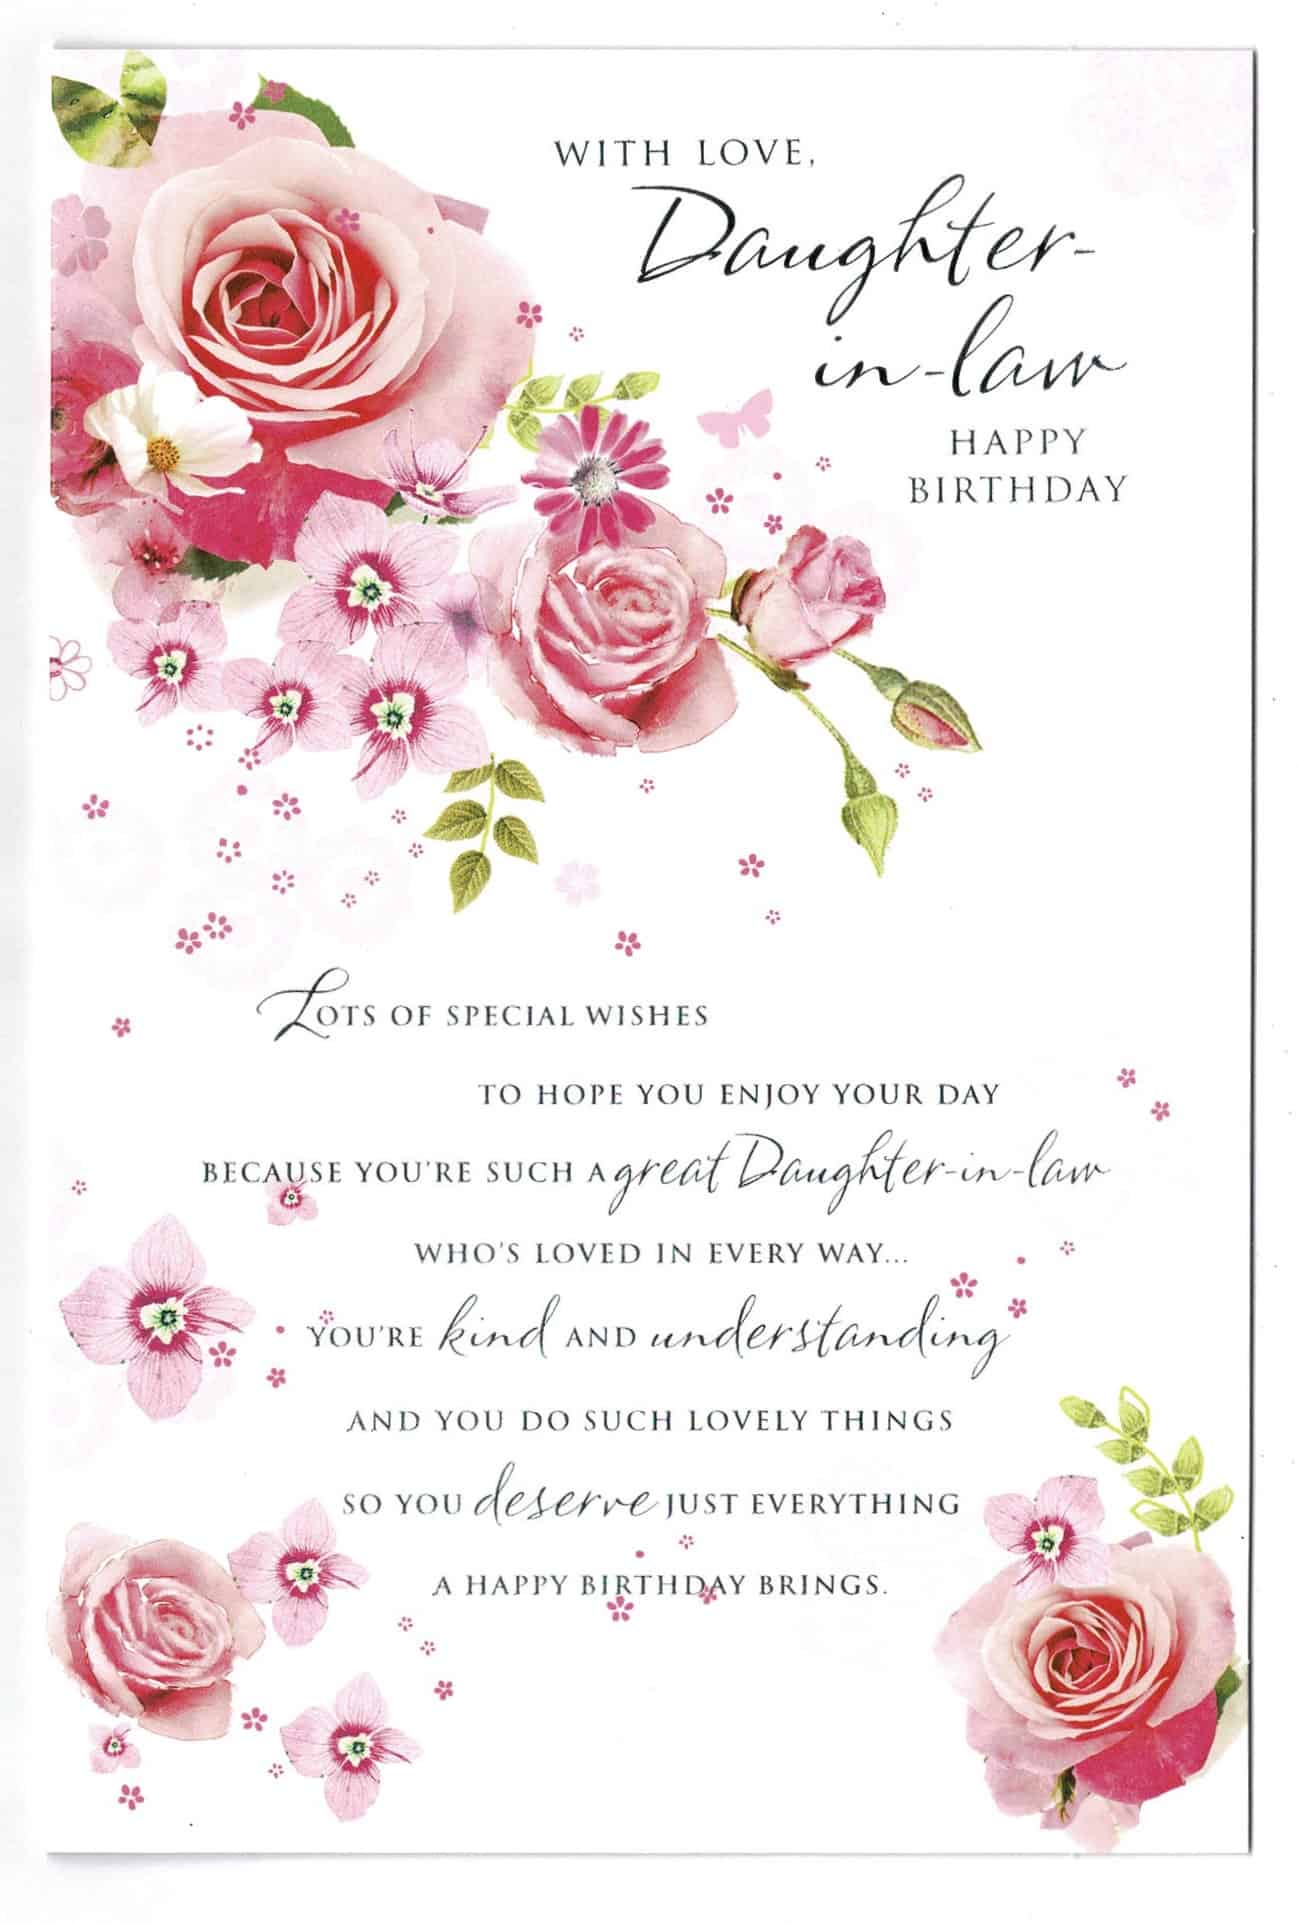 Daughter In Law Birthday Card With Rose And Sentiment Verse Design 